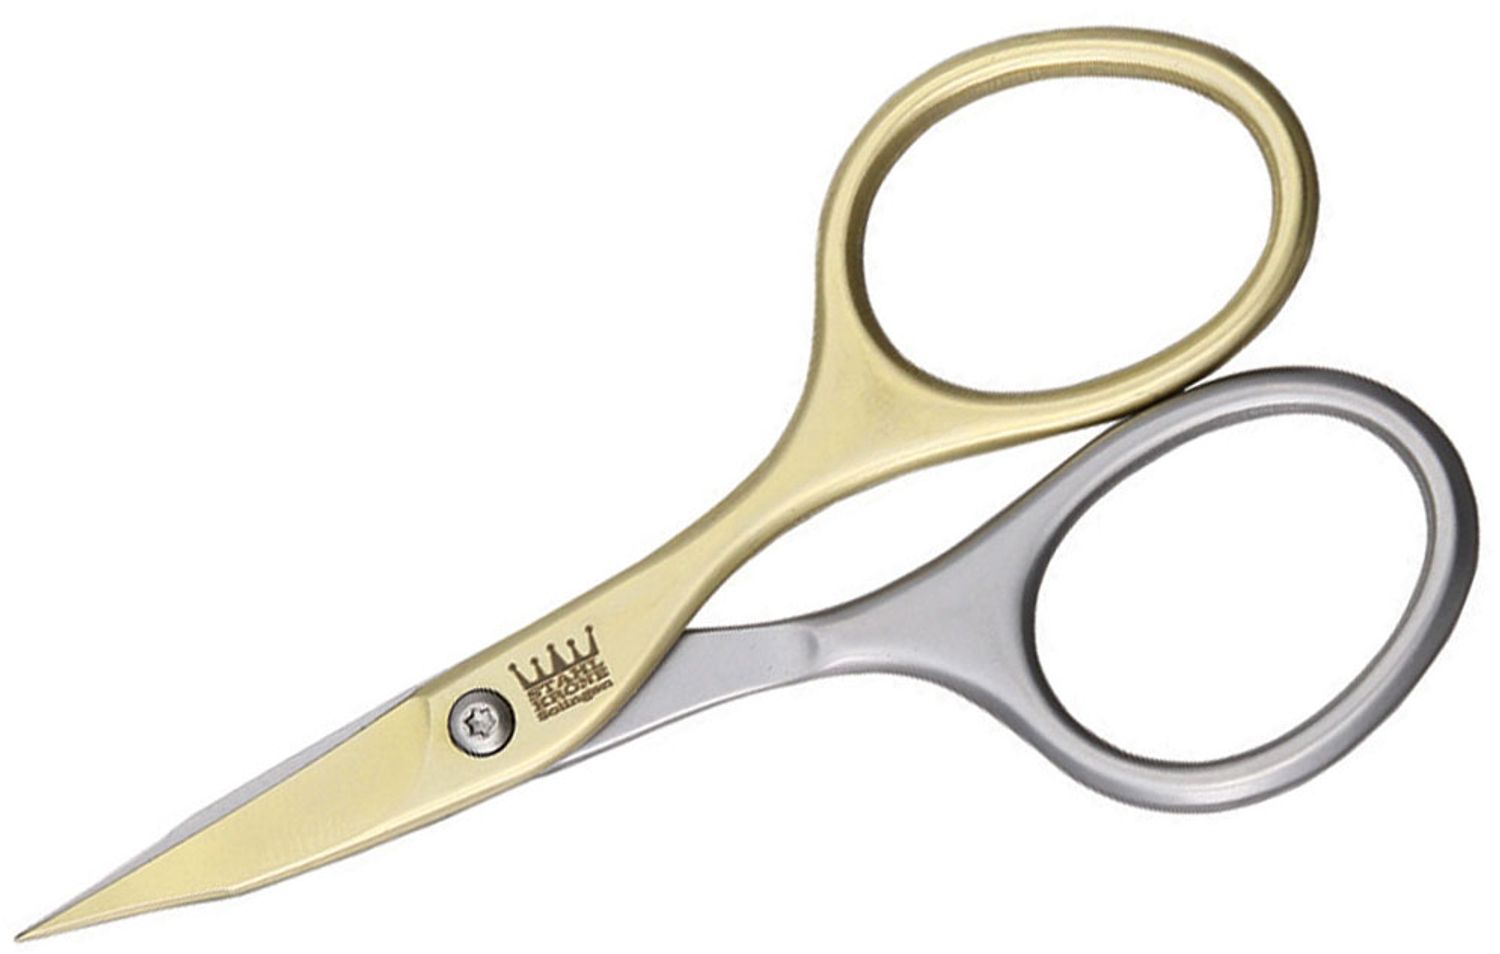 Self Opening Scissors - Discontinued